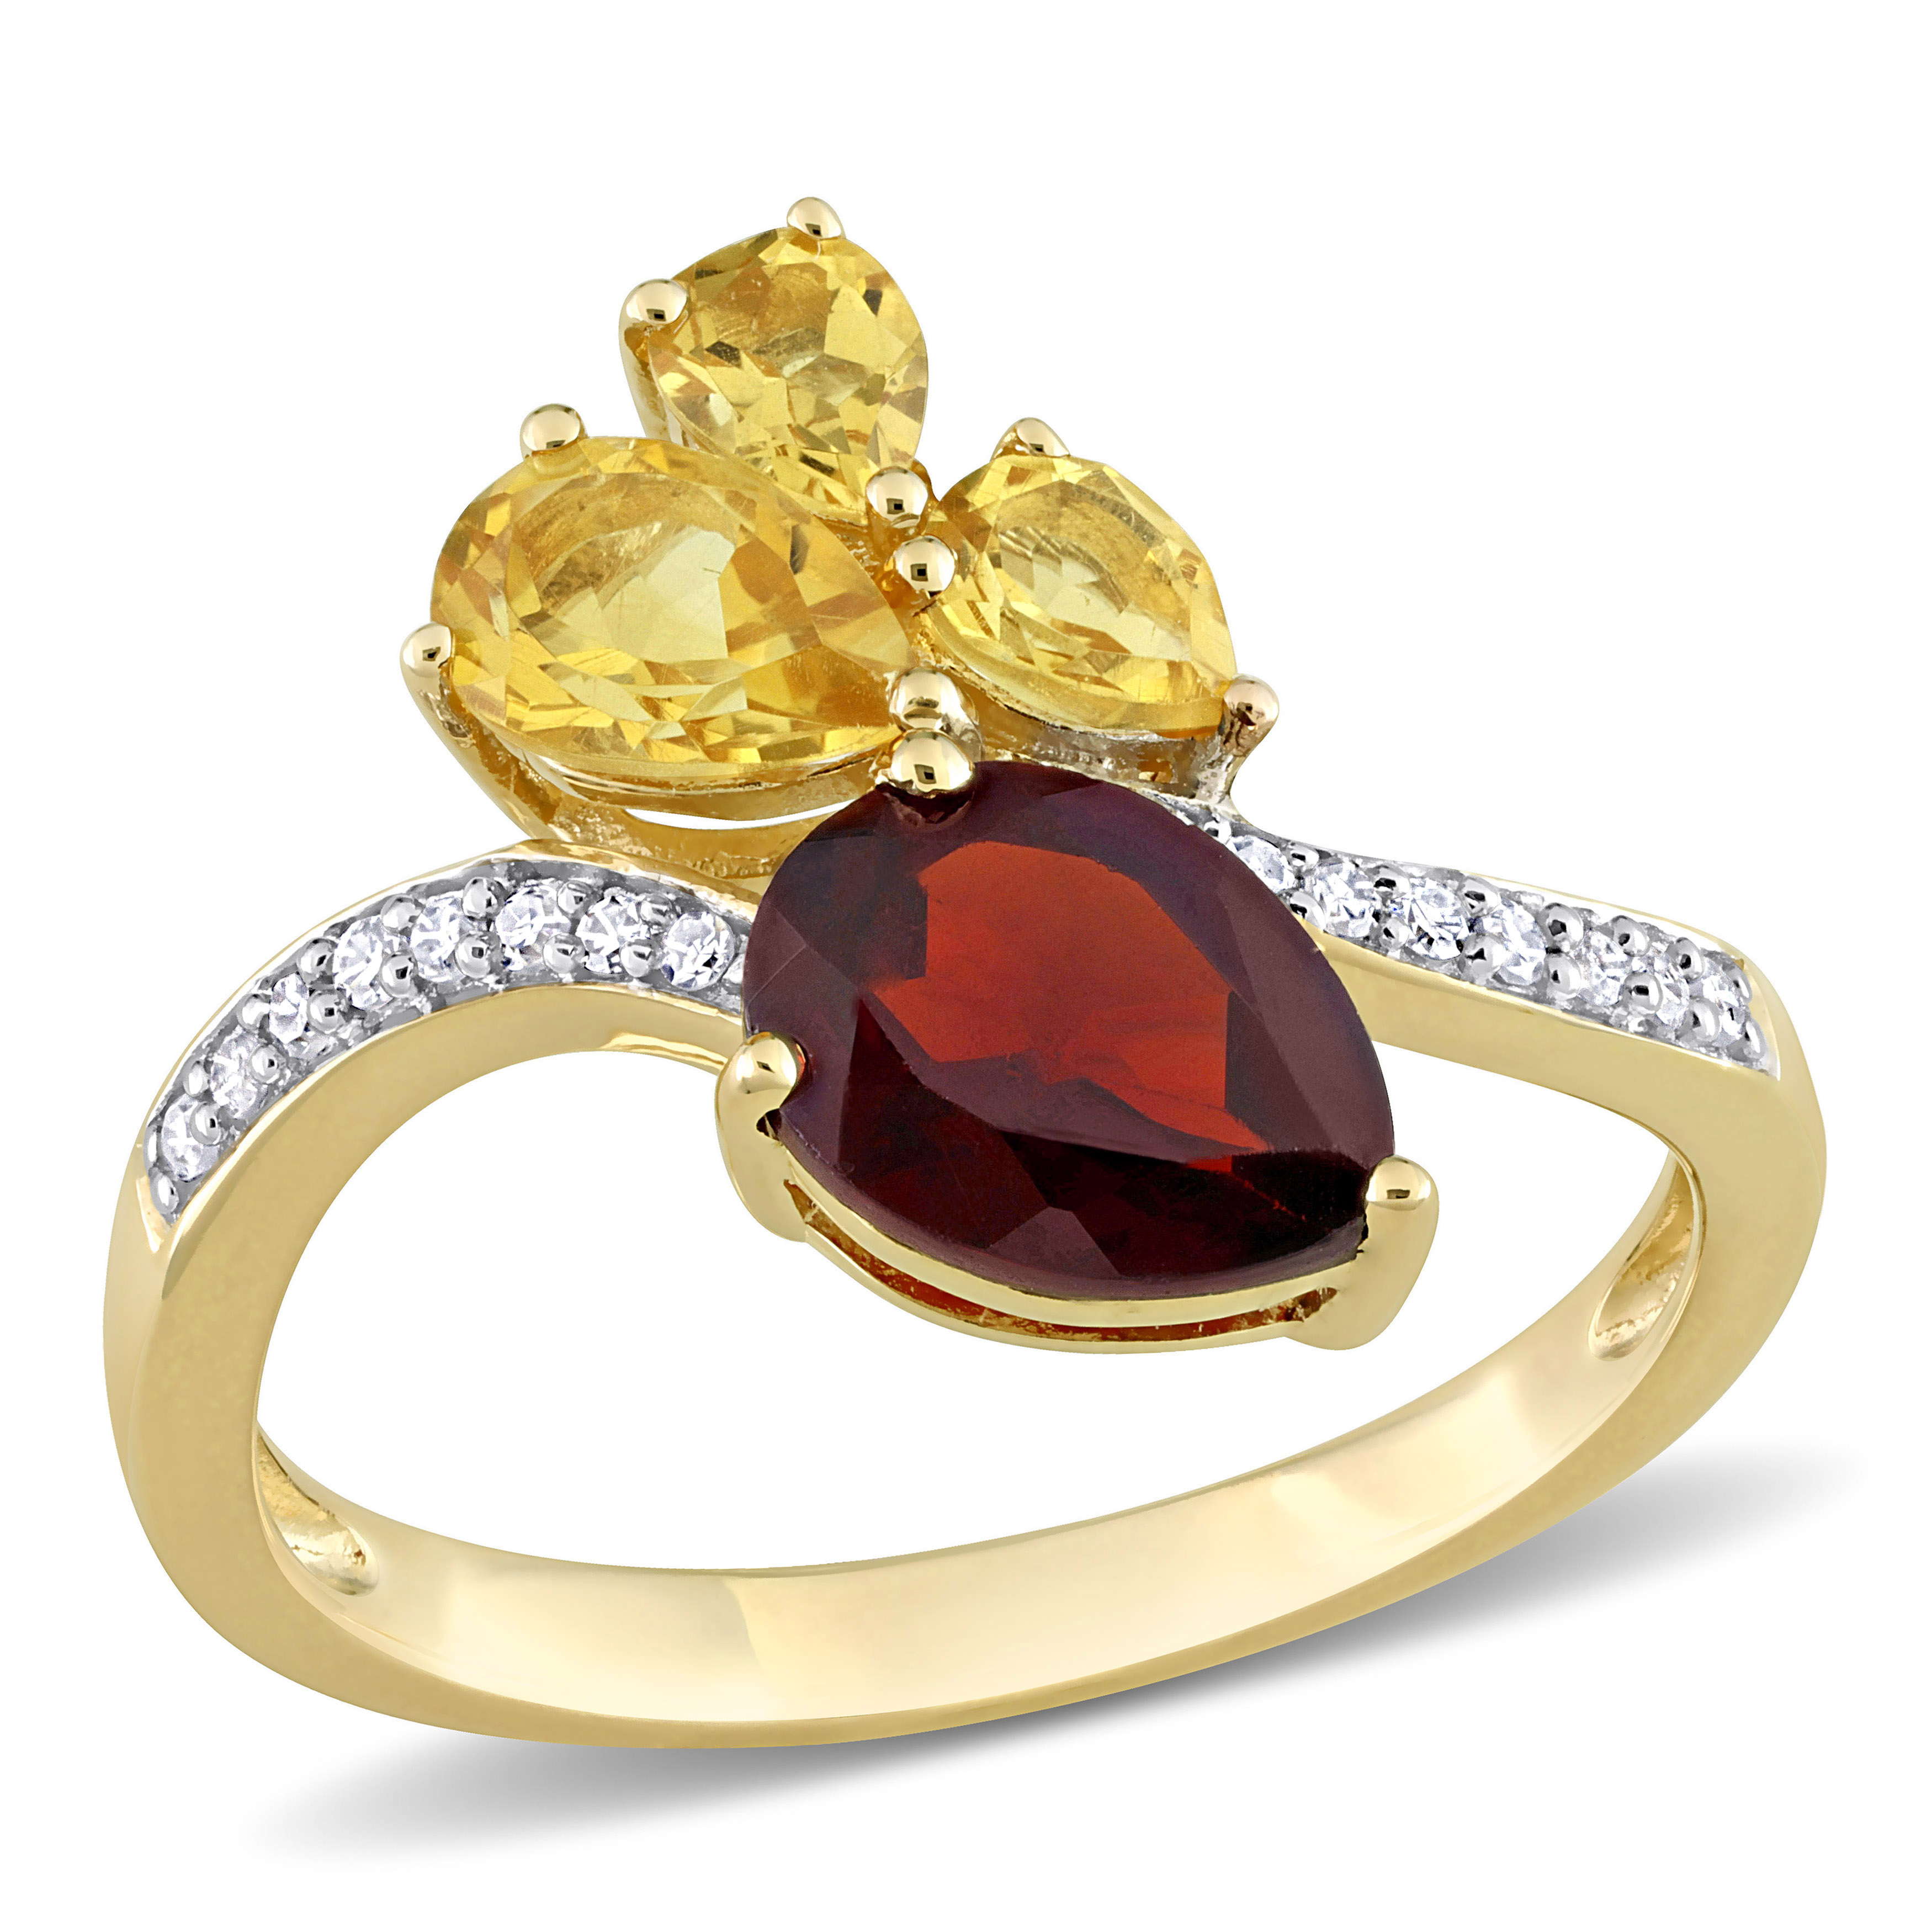 2 CT TGW Pear-Shape Garnet and Citrine and 1/10 CT TDW Diamond Toi et Moi Ring in 14k Yellow Gold